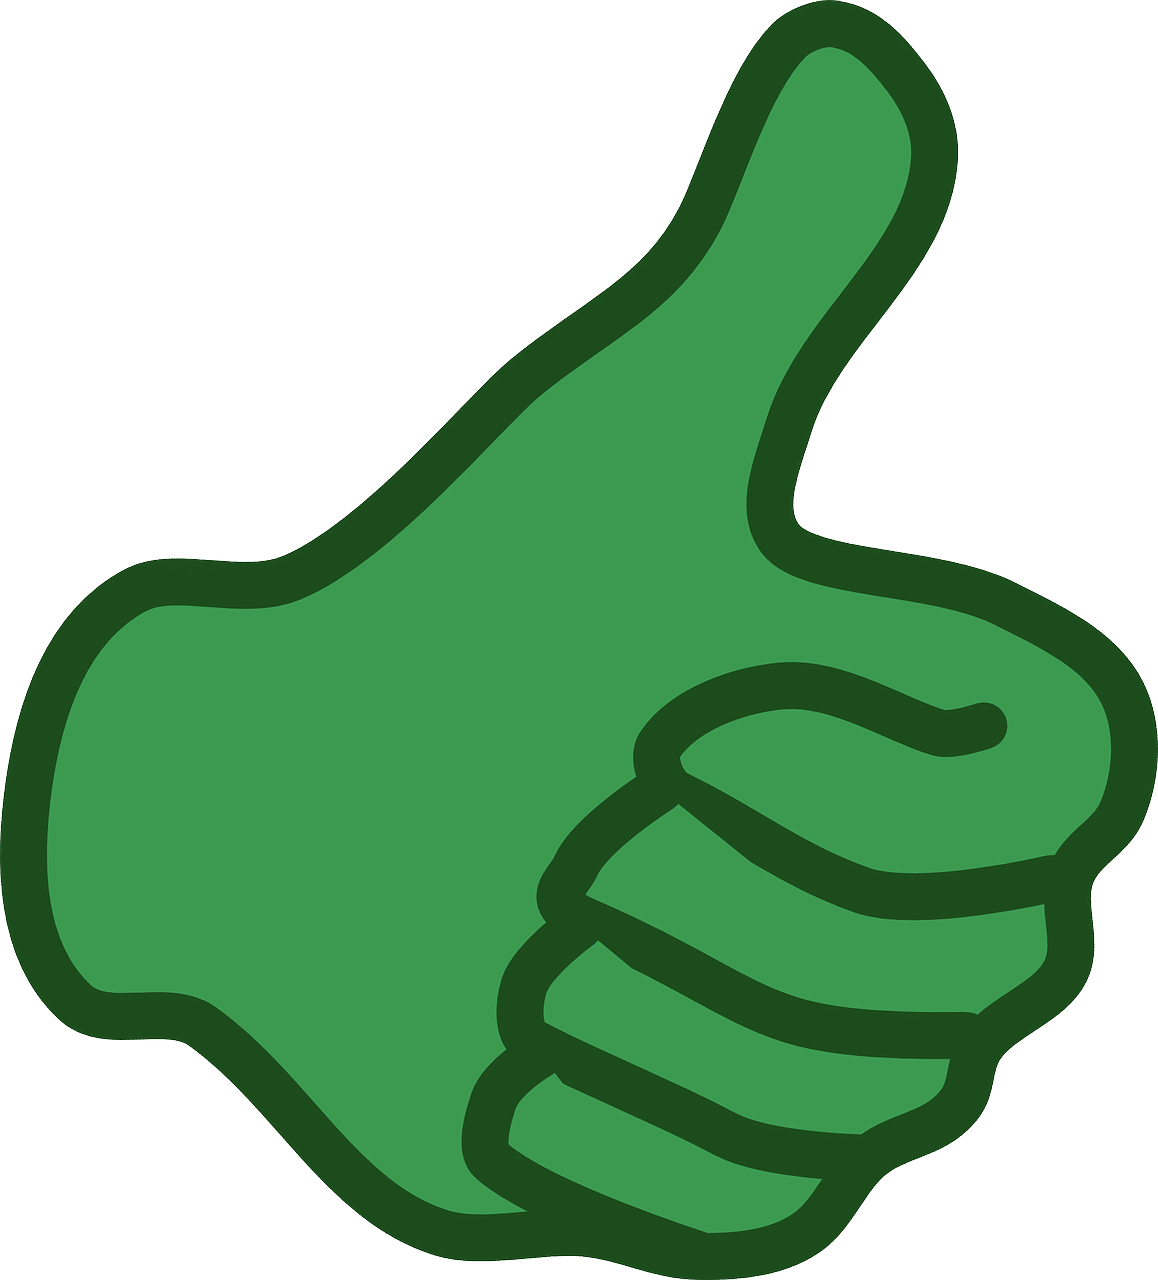 Thumb up and down - Openclipart